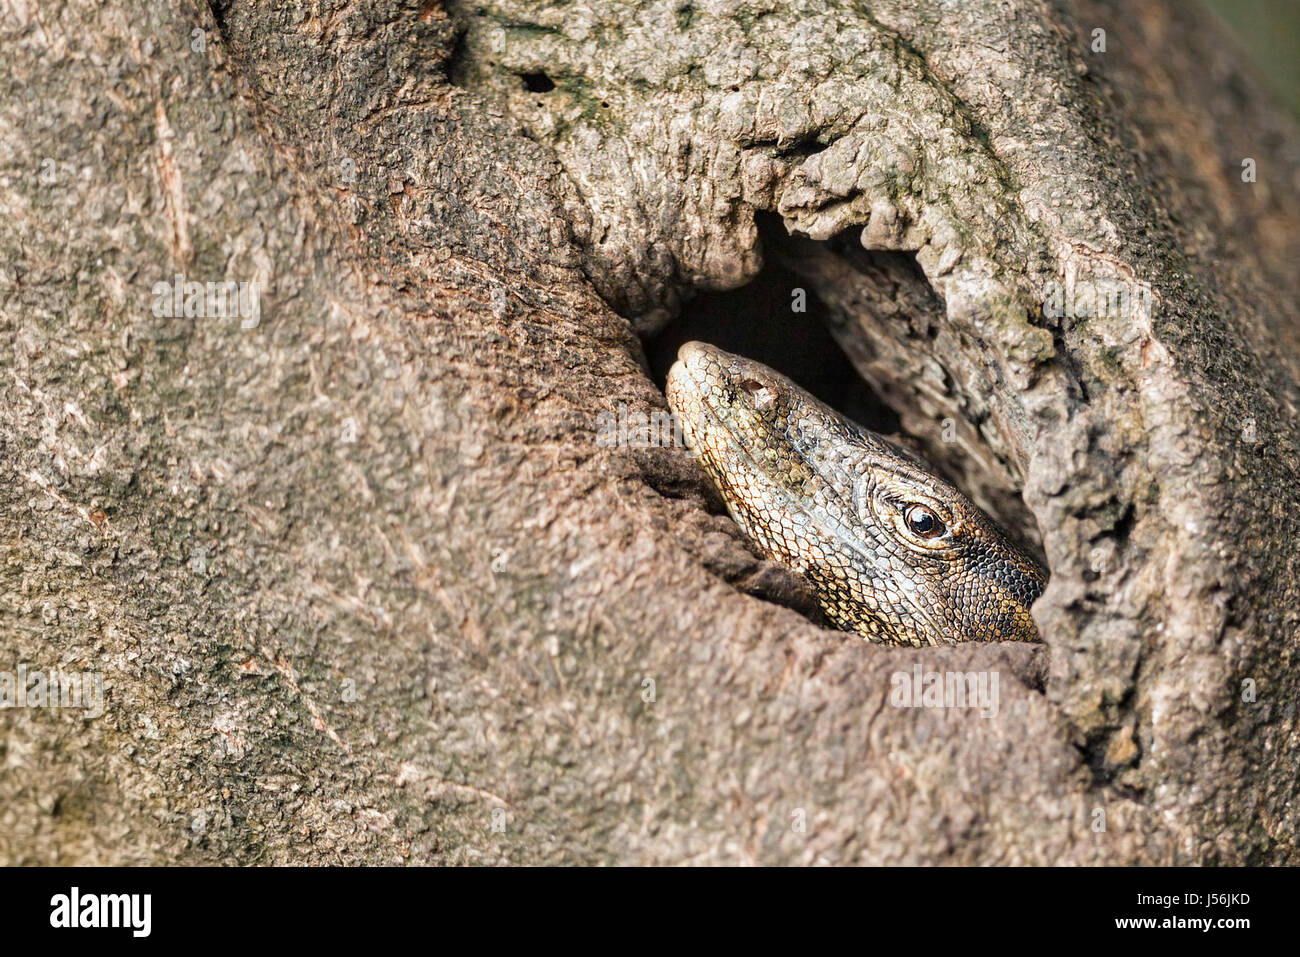 Adult Water Monitor Lizard (Varanus salvator) inside the hollow of a mangrove tree trunk next to a river, Singapore Stock Photo